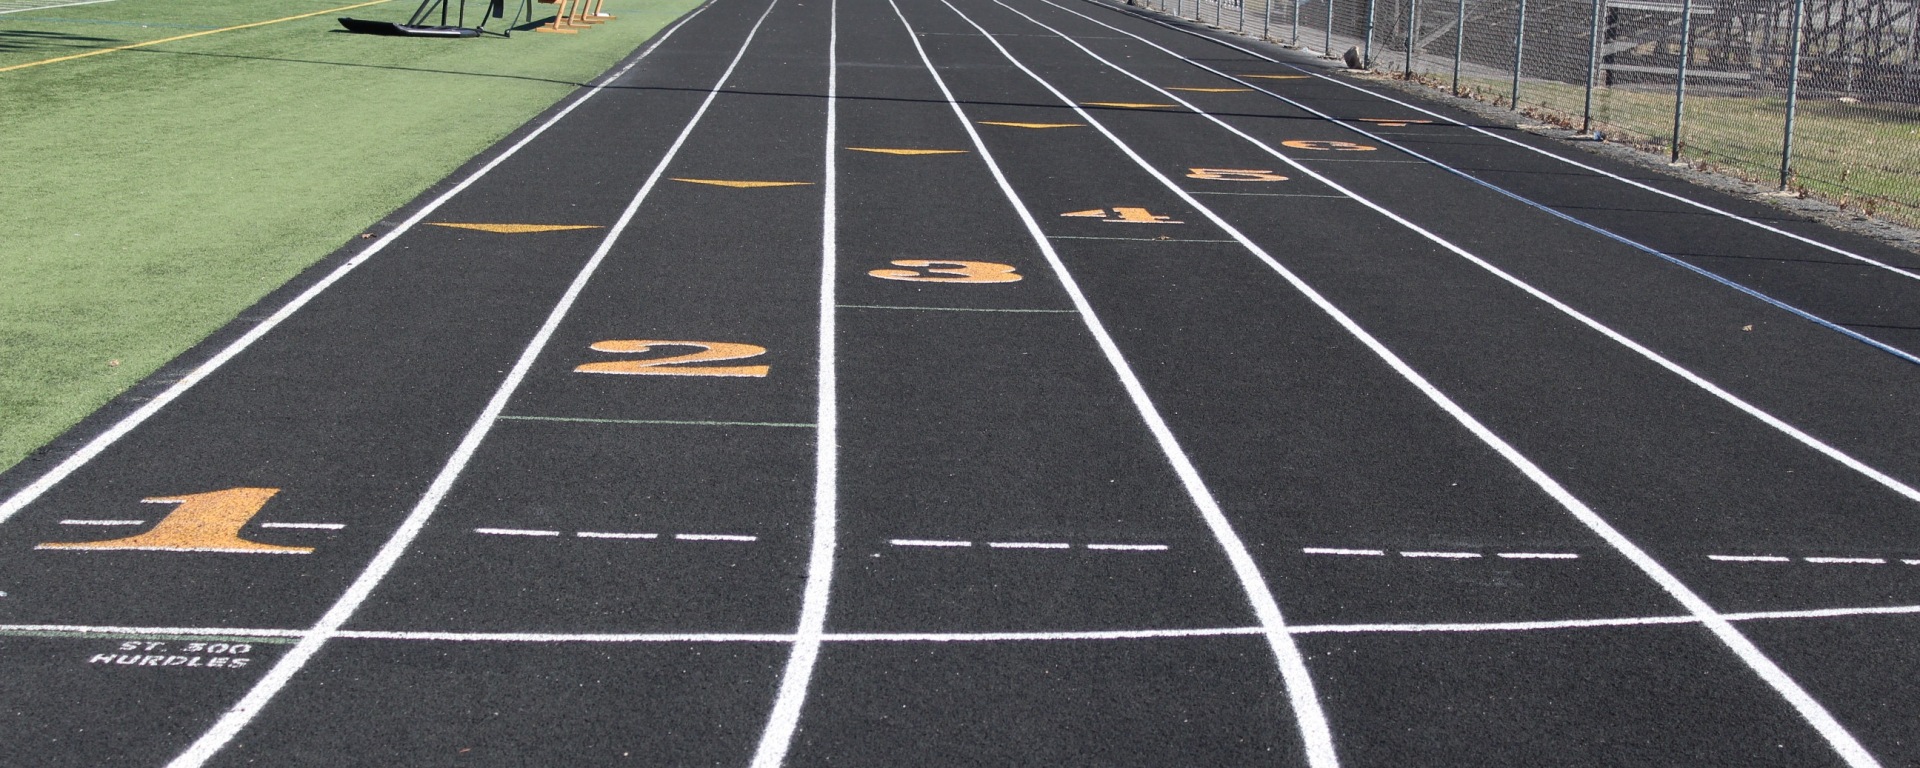 The track in the OM stadium. The exterior of the school is visible in the distance.